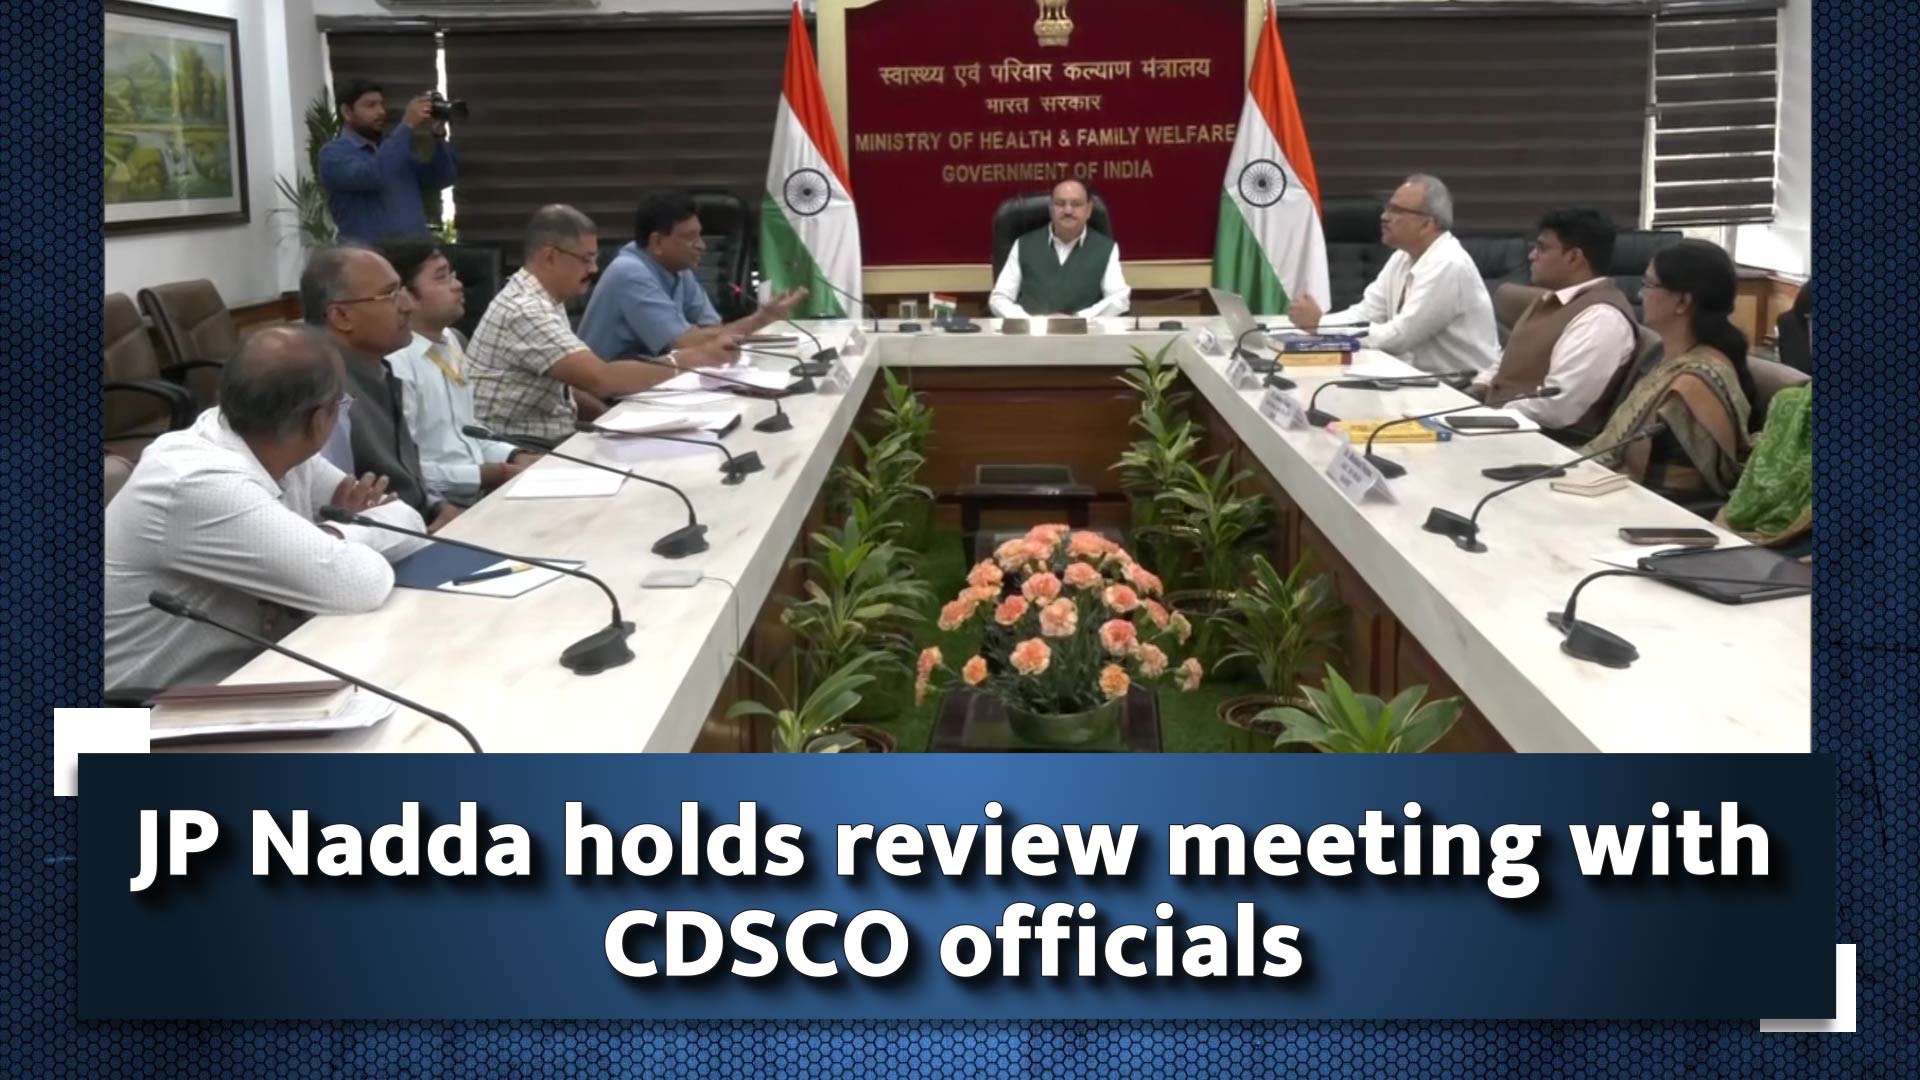 JP Nadda holds review meeting with CDSCO officials